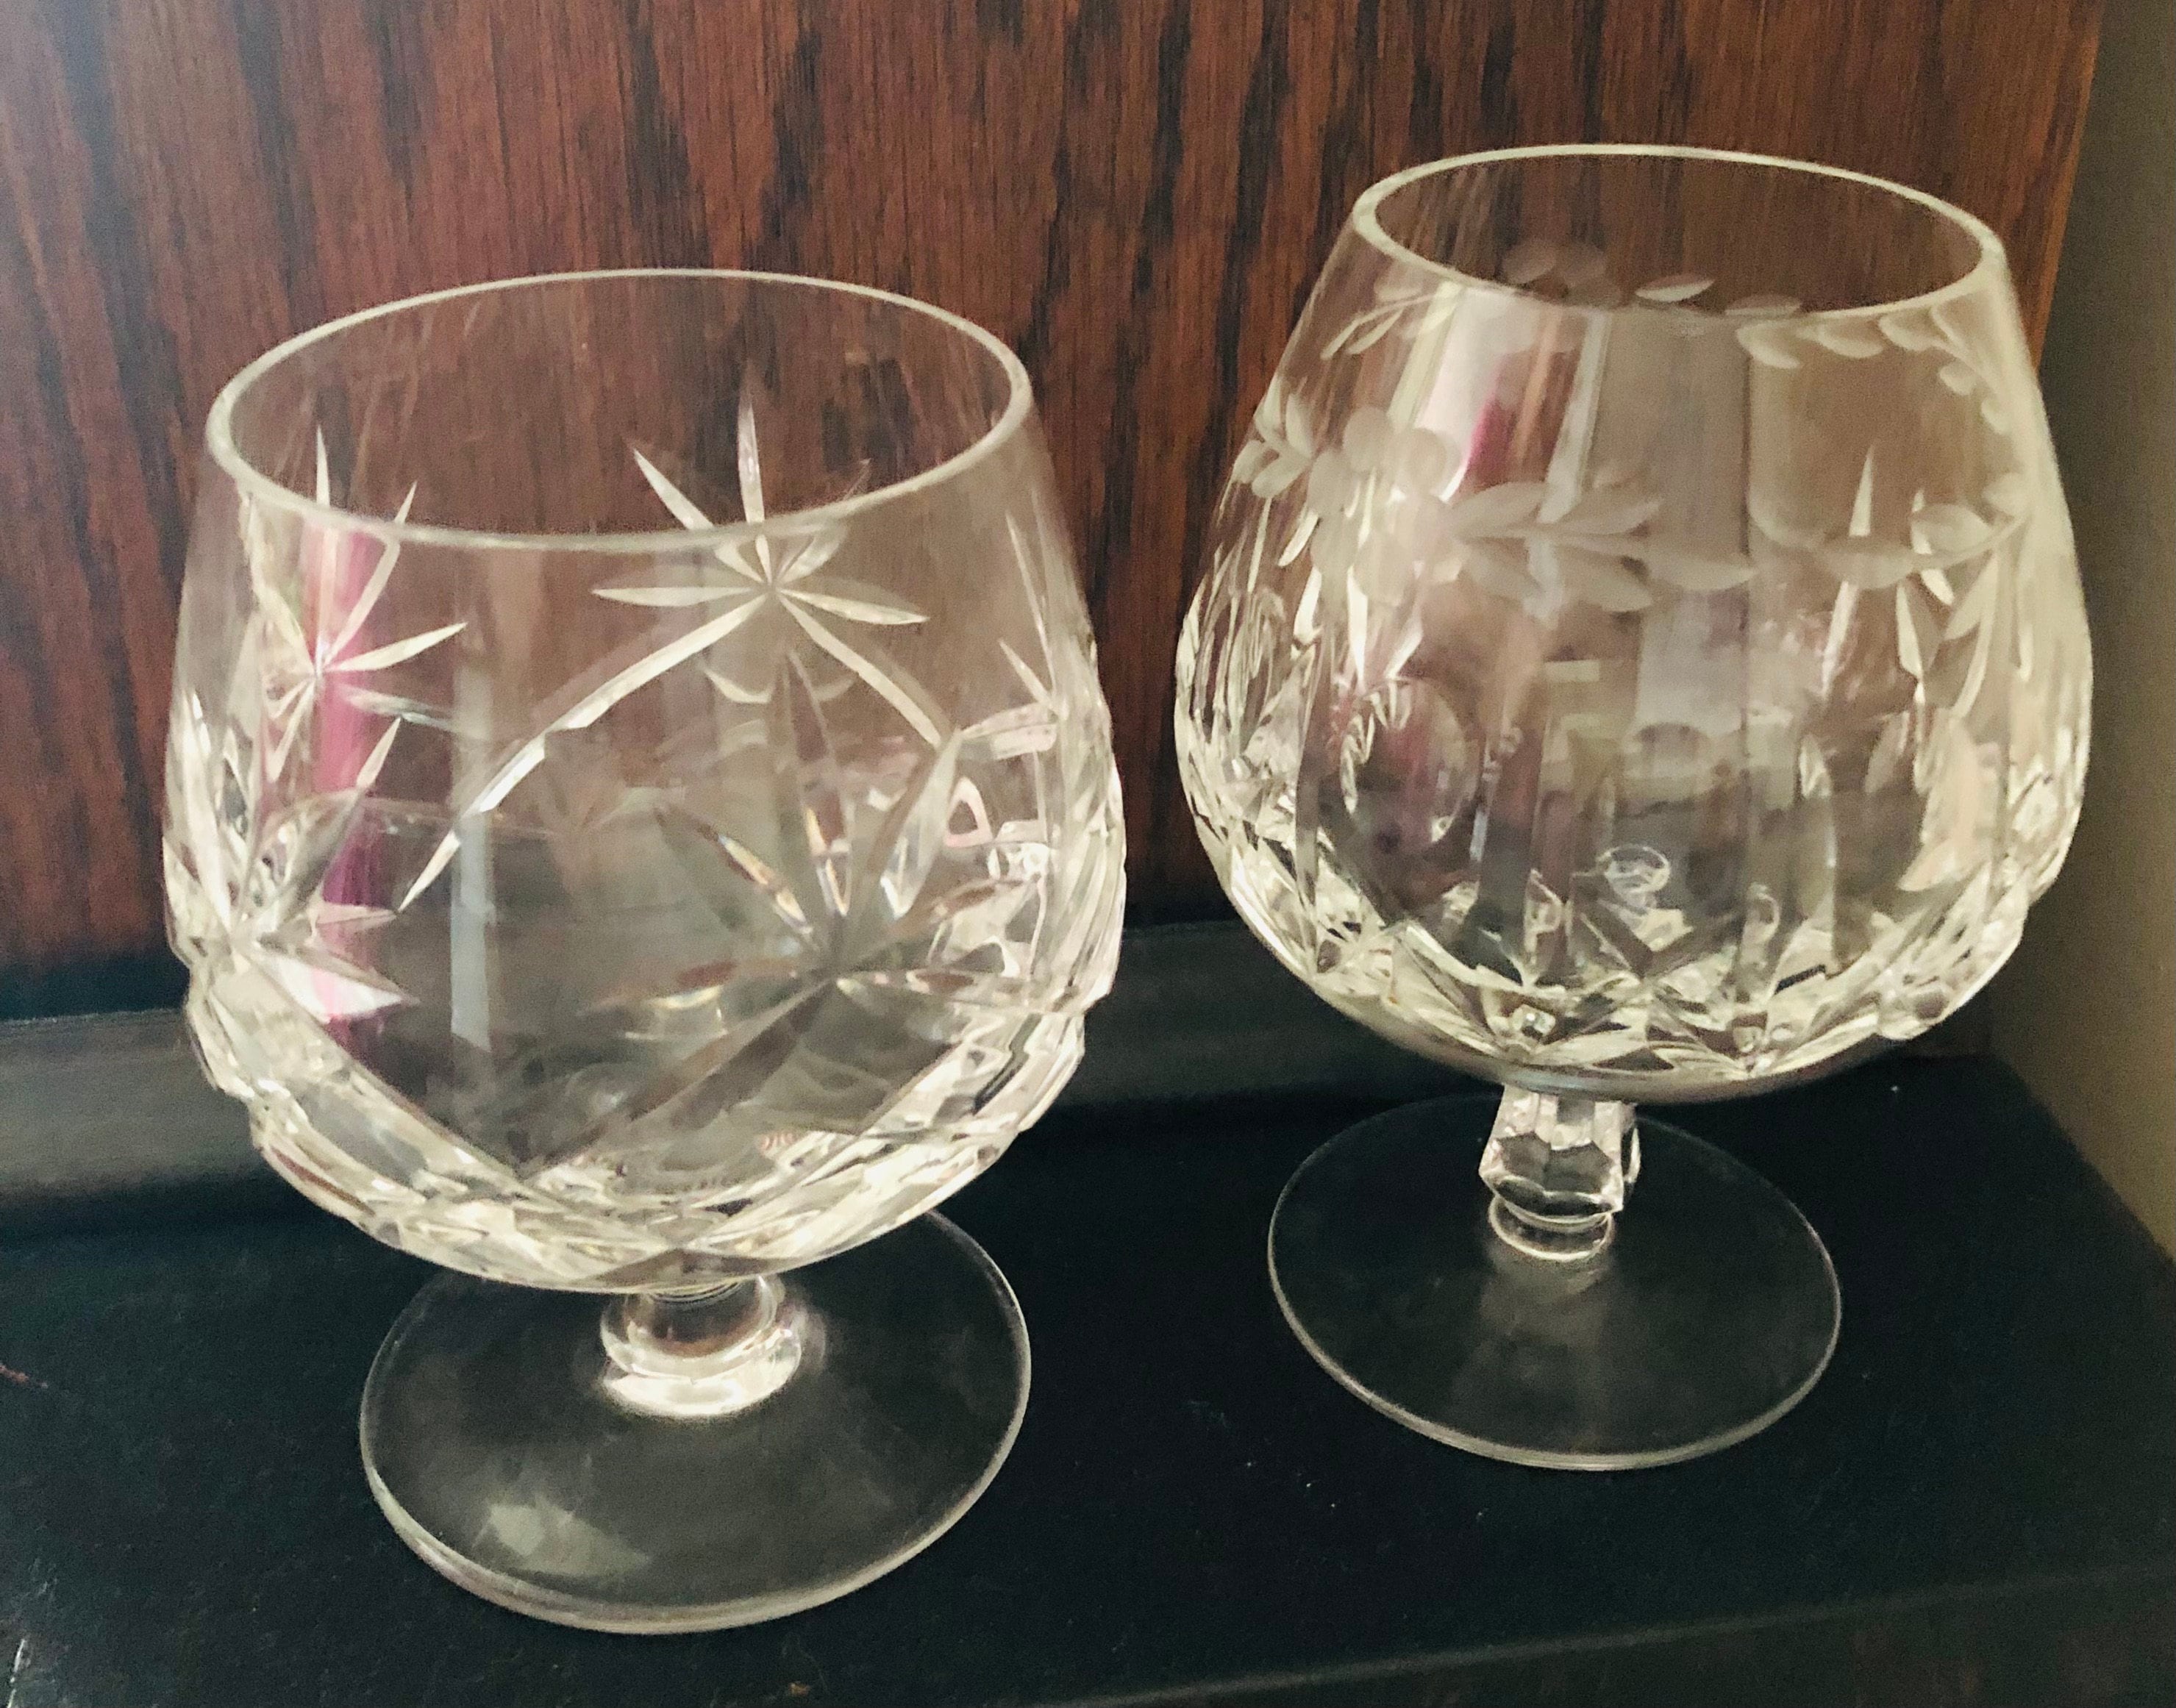 Vintage Crystal Brandy Glasses. 2 Available in Different Patterns. Free  Shipping From Canada -  Canada